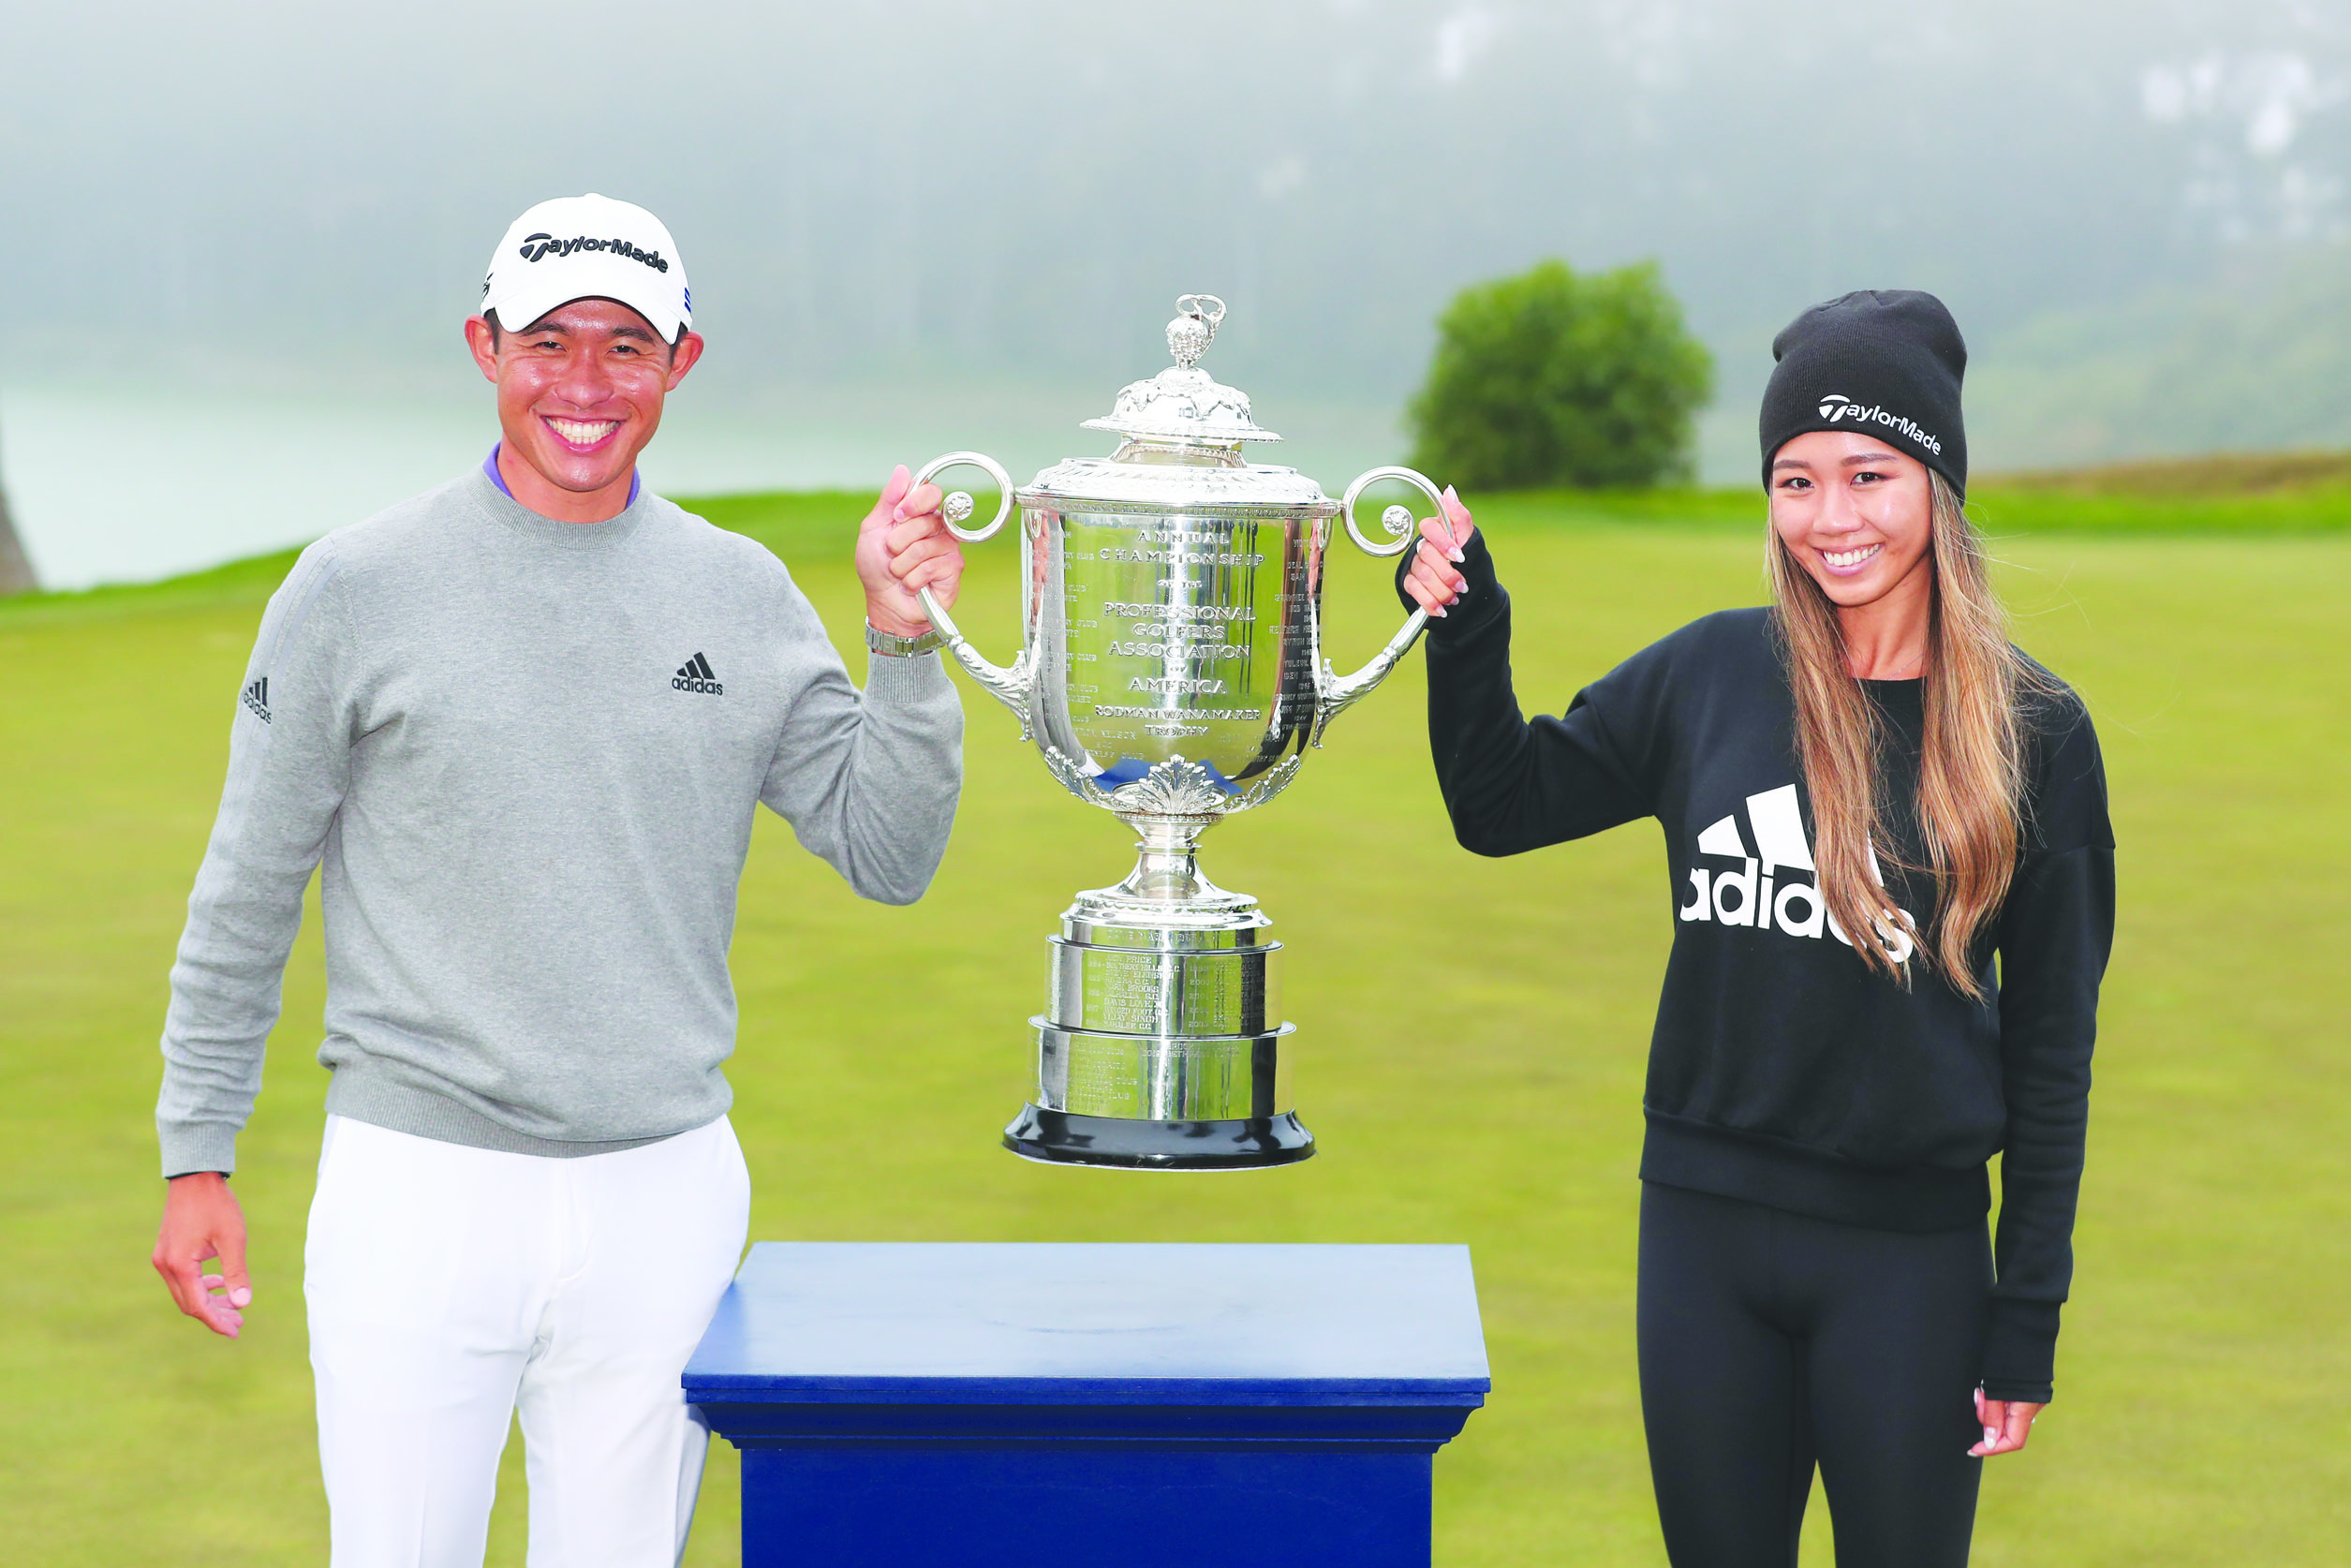 SAN FRANCISCO, CALIFORNIA - AUGUST 09: Collin Morikawa of the United States celebrates with the Wanamaker Trophy and girlfriend Katherine Zhu after winning the 2020 PGA Championship at TPC Harding Park on August 09, 2020 in San Francisco, California.   Tom Pennington/Getty Images/AFP